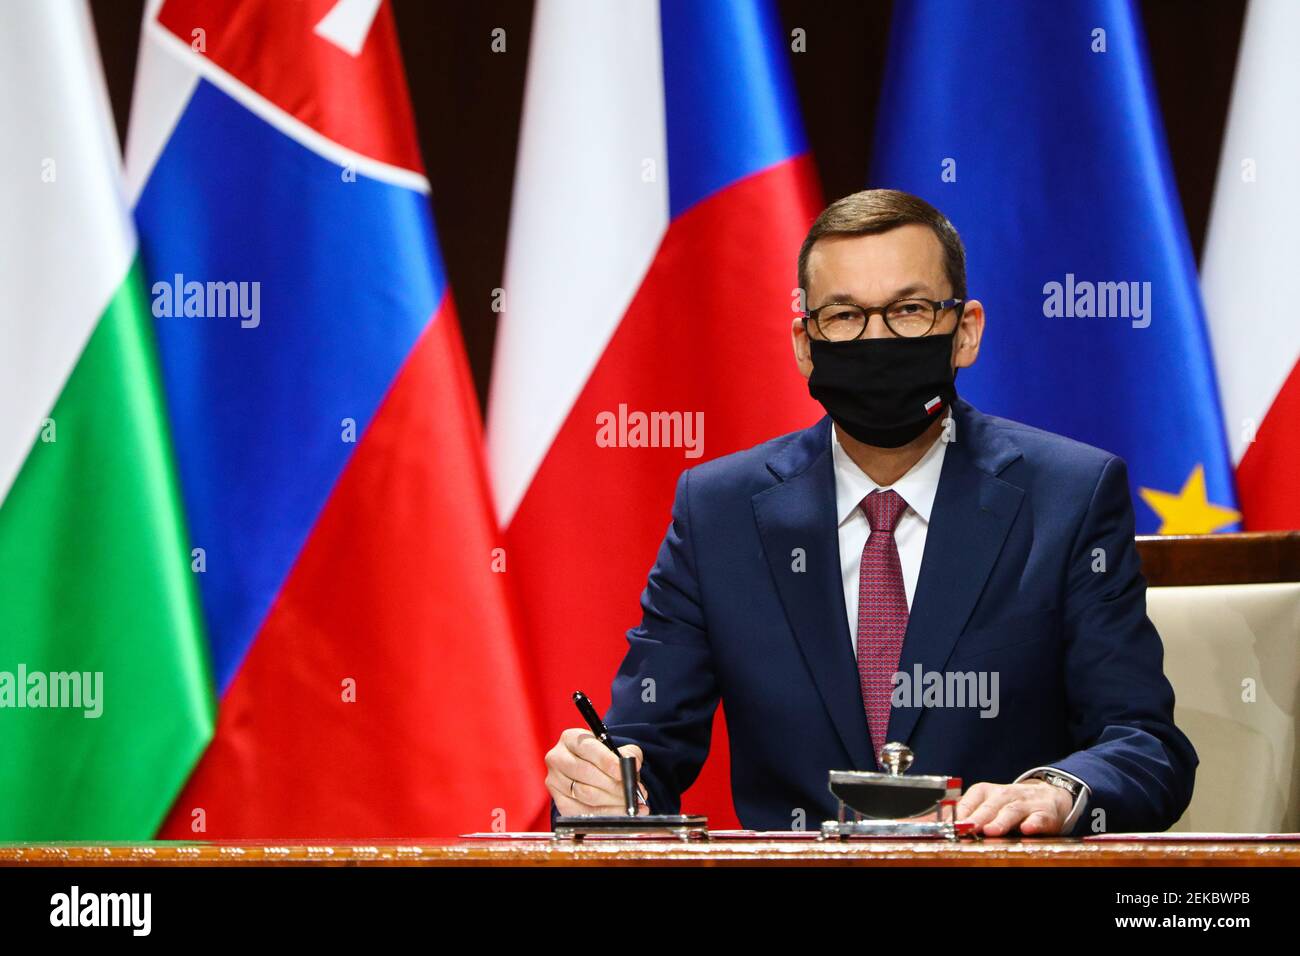 Polish Prime Minister Mateusz Morawiecki seen signing the documents.  Summit of Heads of Government of the Visegrad Group (V4) on the occasion of the Stock Photo